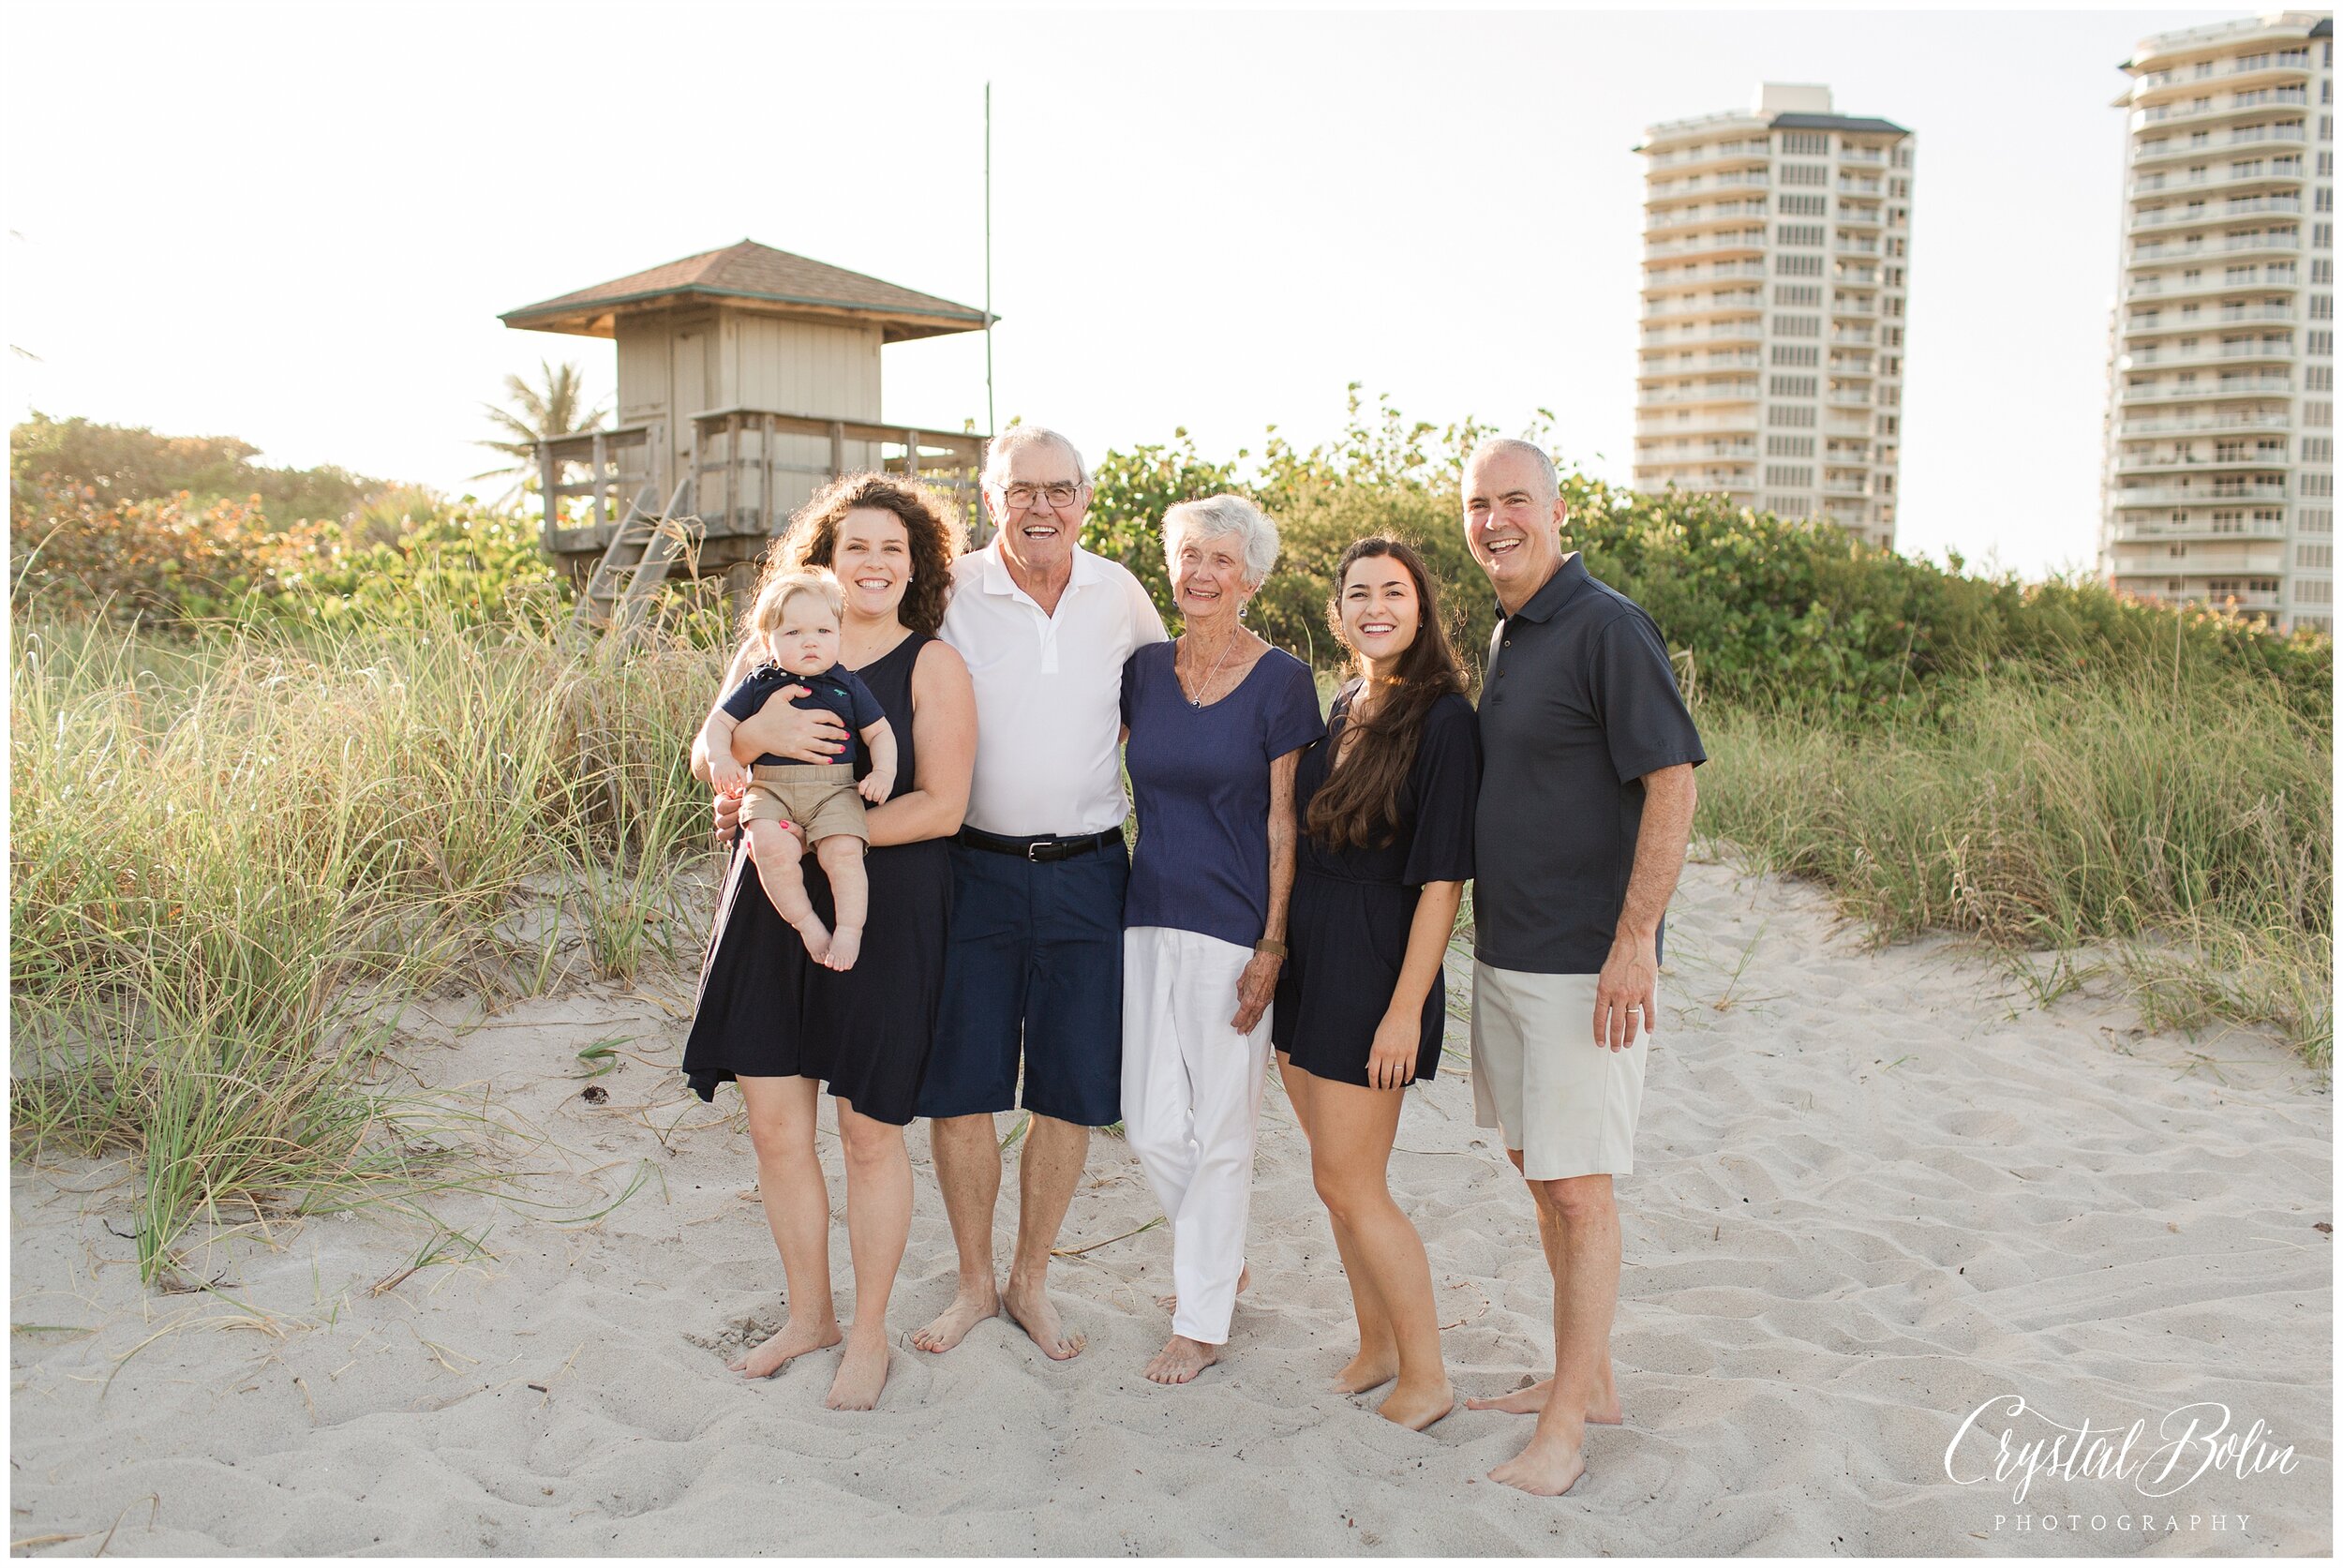 2021 Family Vacation Photos in Singer Island, FL